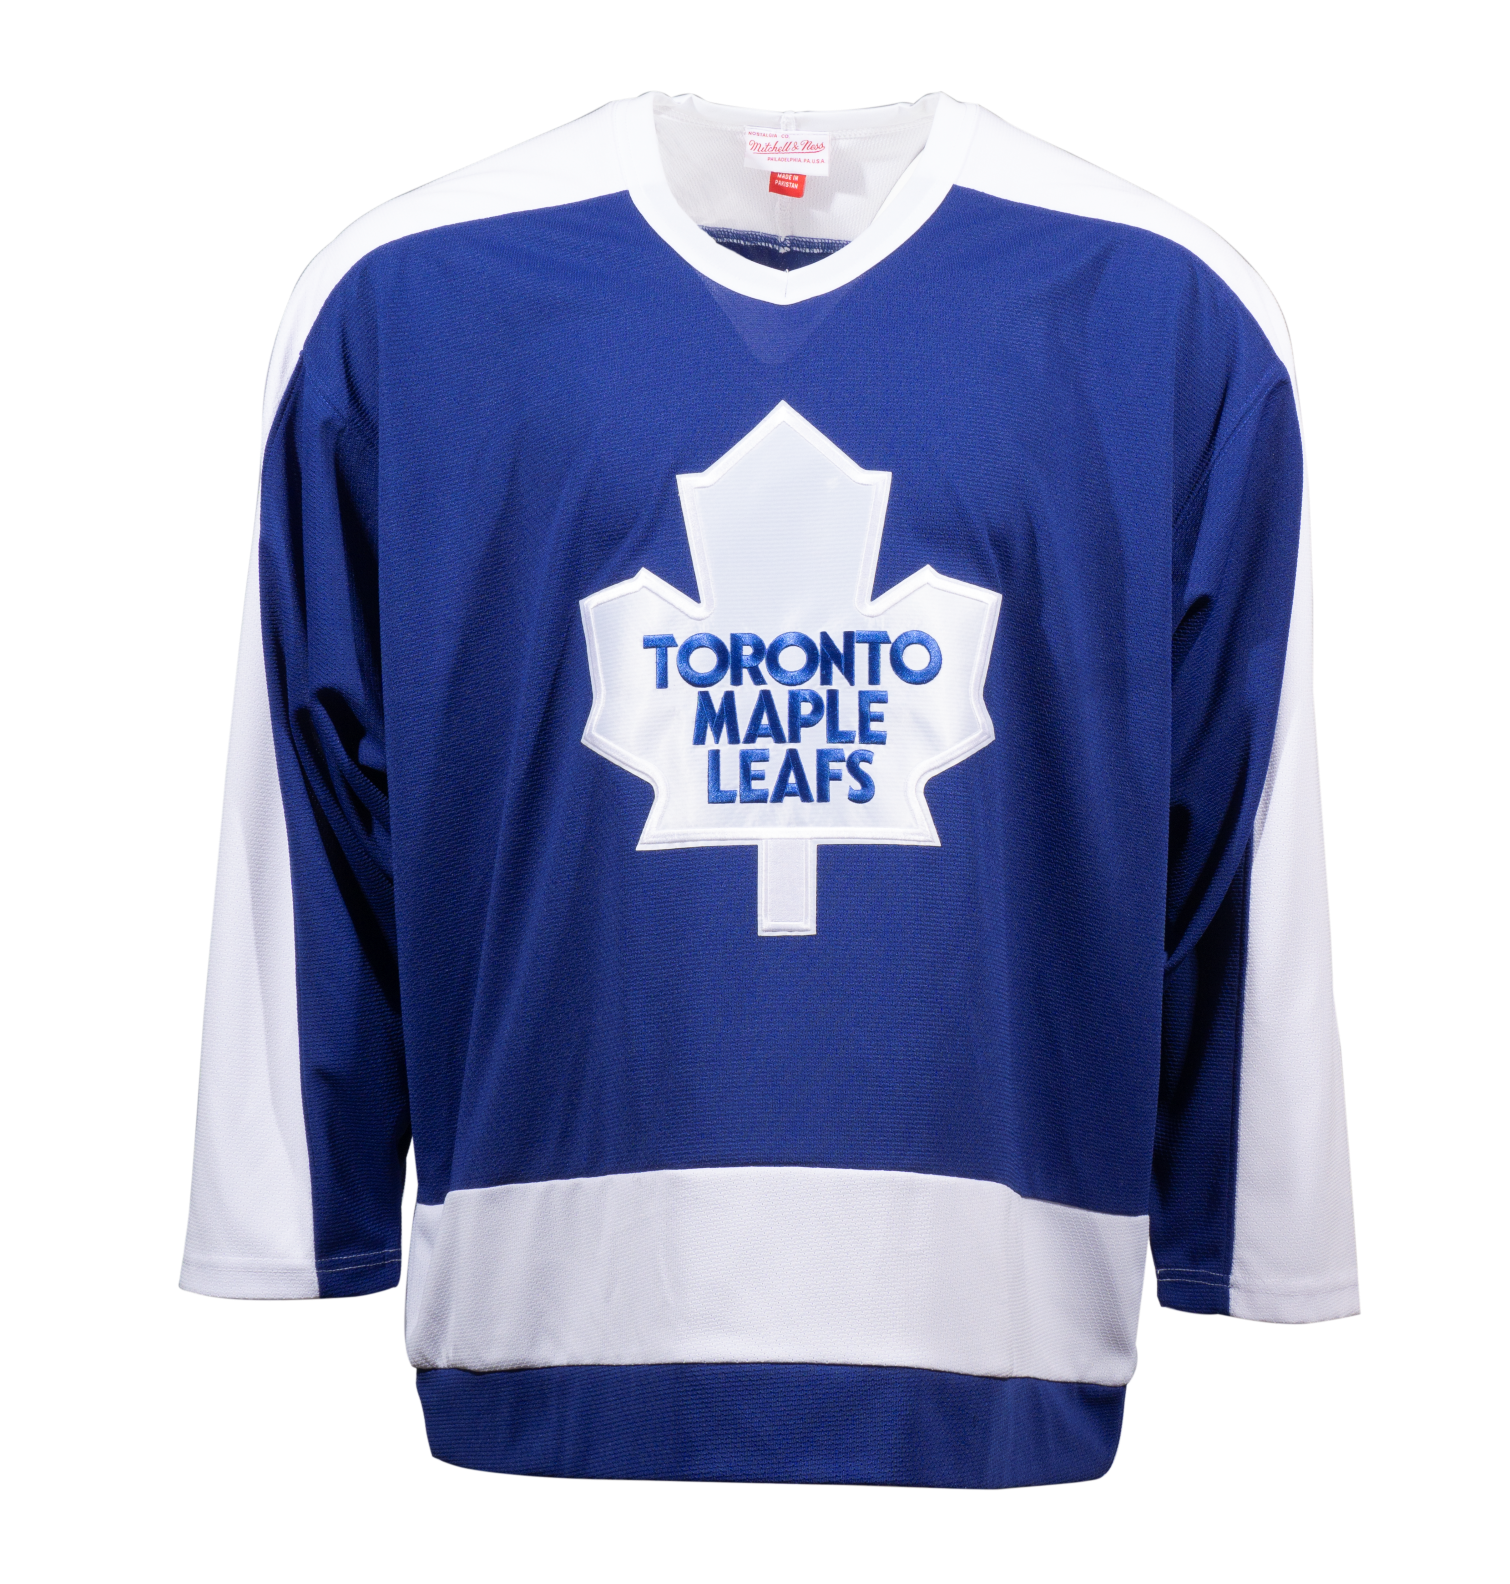 Vintage Toronto Maple Leafs Jerseys & Shirts and other Retro Uniforms